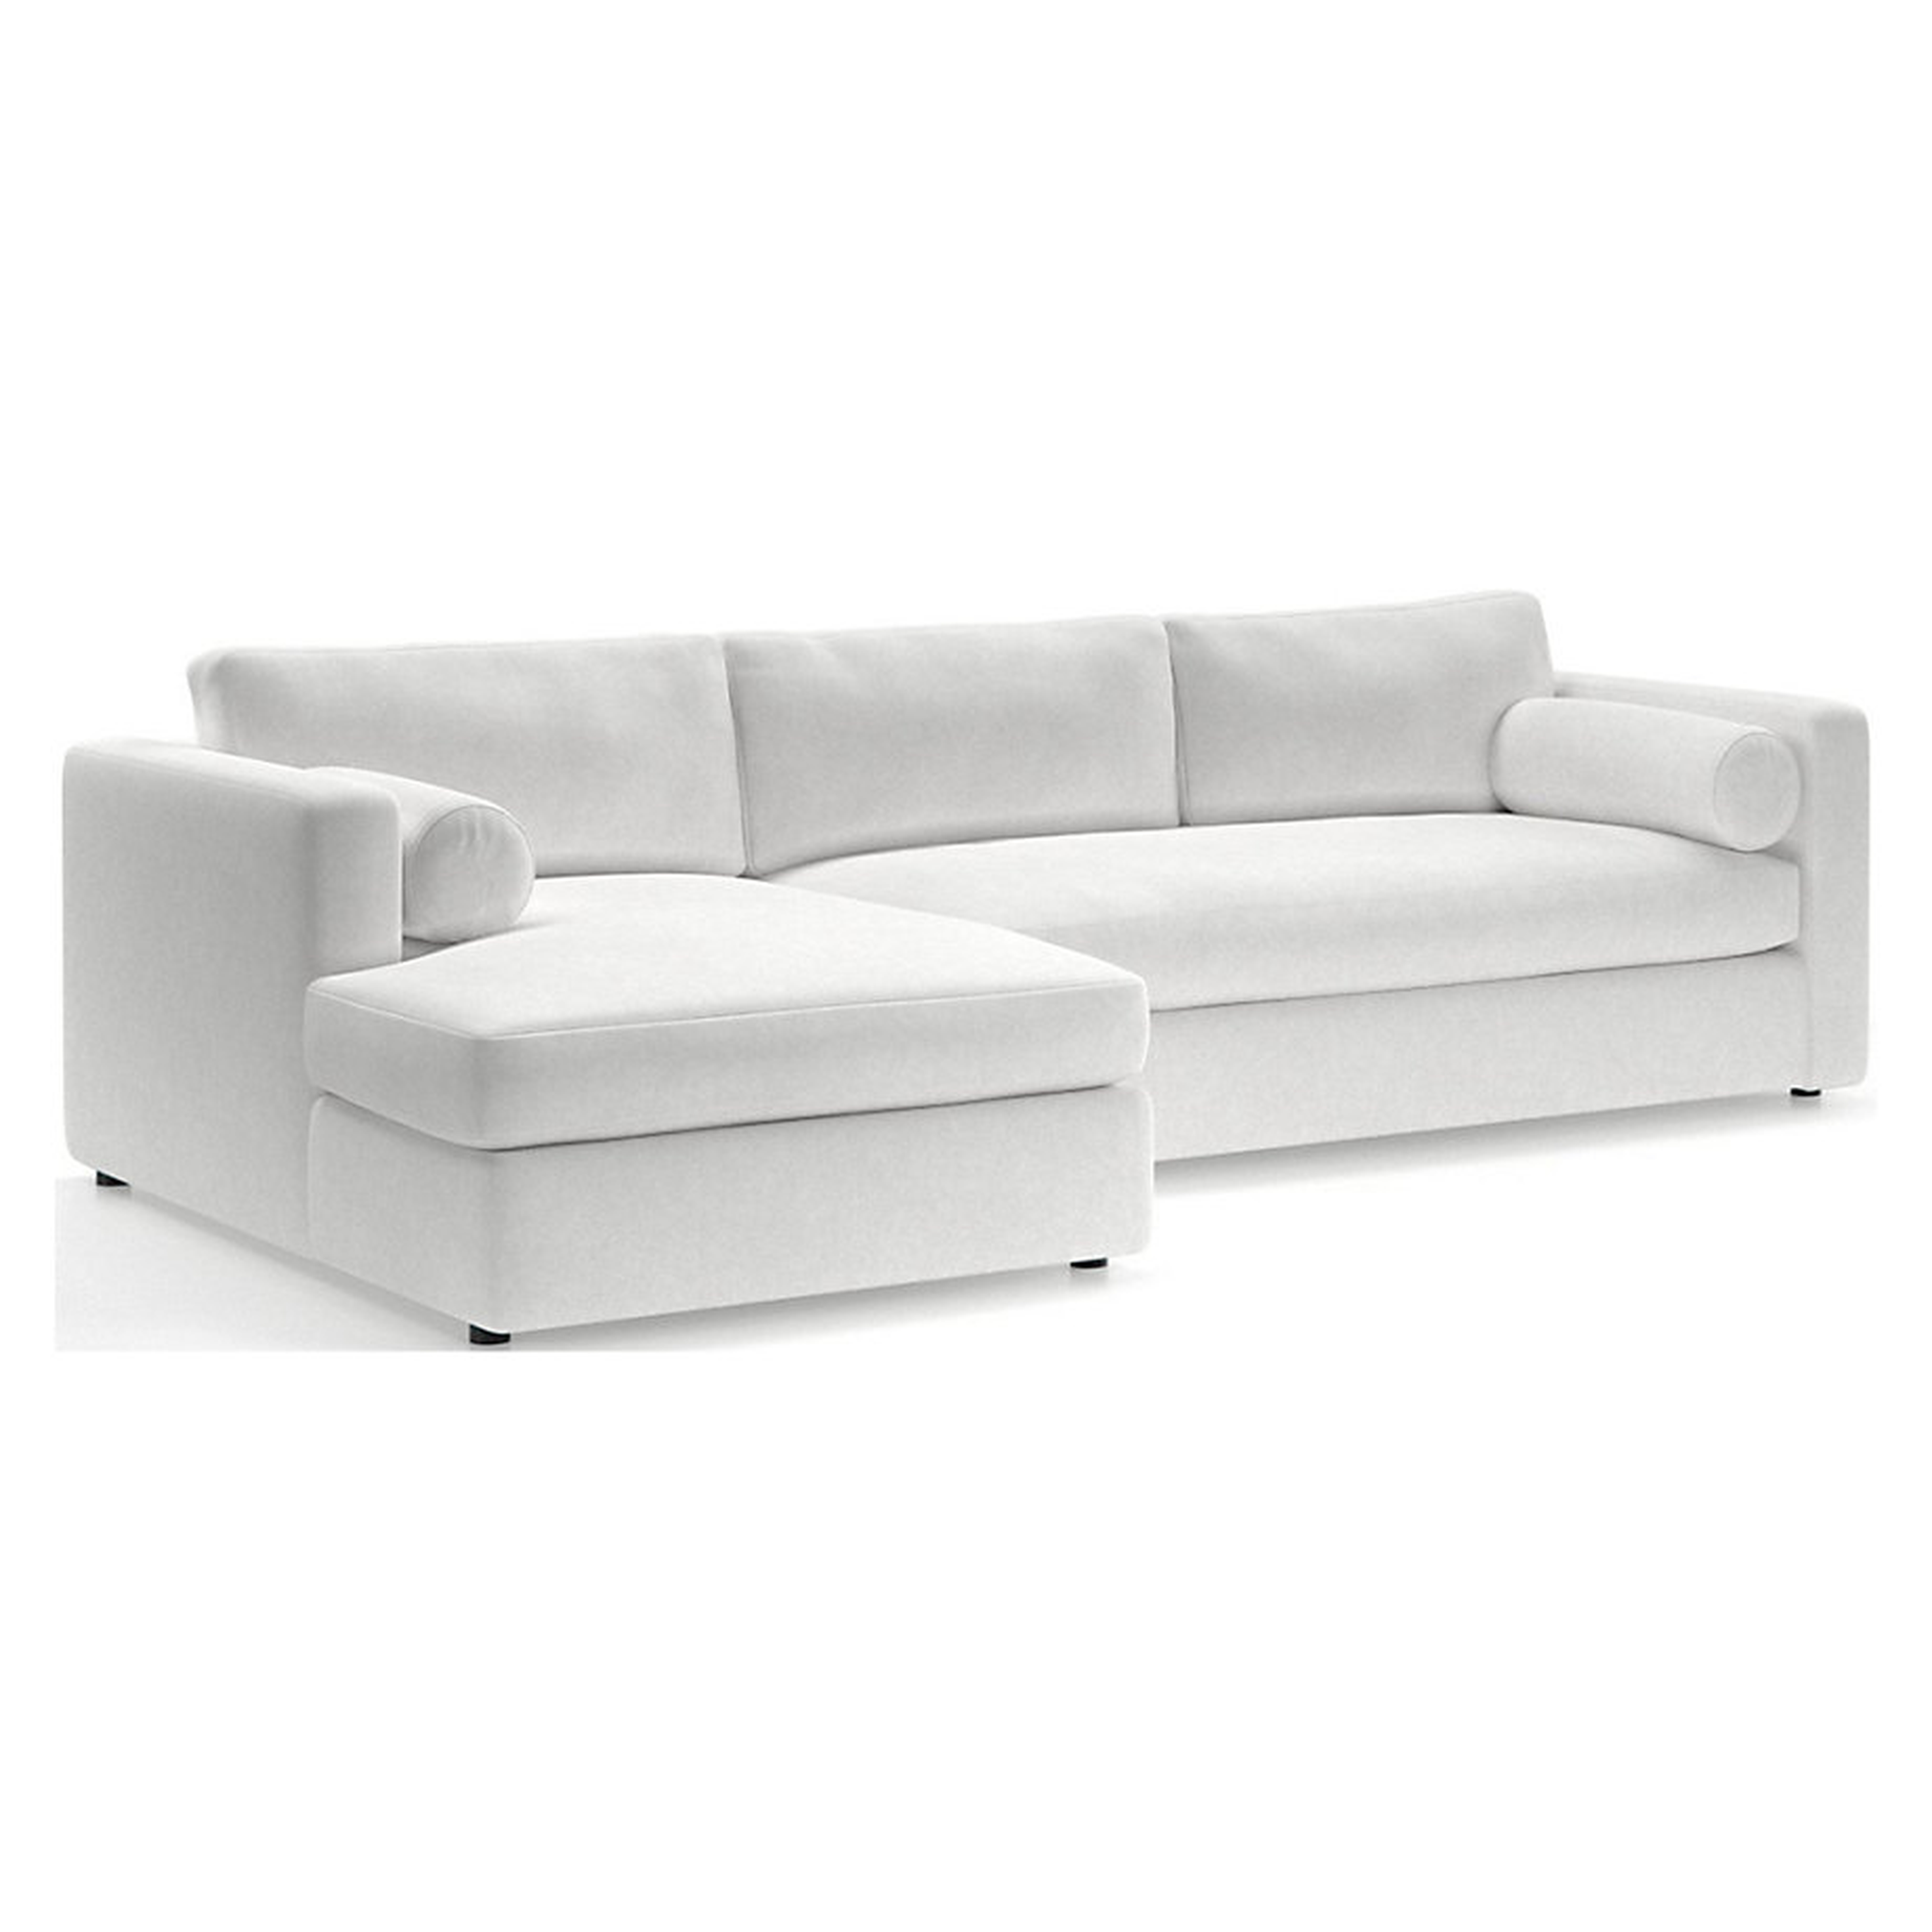 Aris 2-Piece Left-Arm Chaise Sectional - Microfiber/Ice - Crate and Barrel